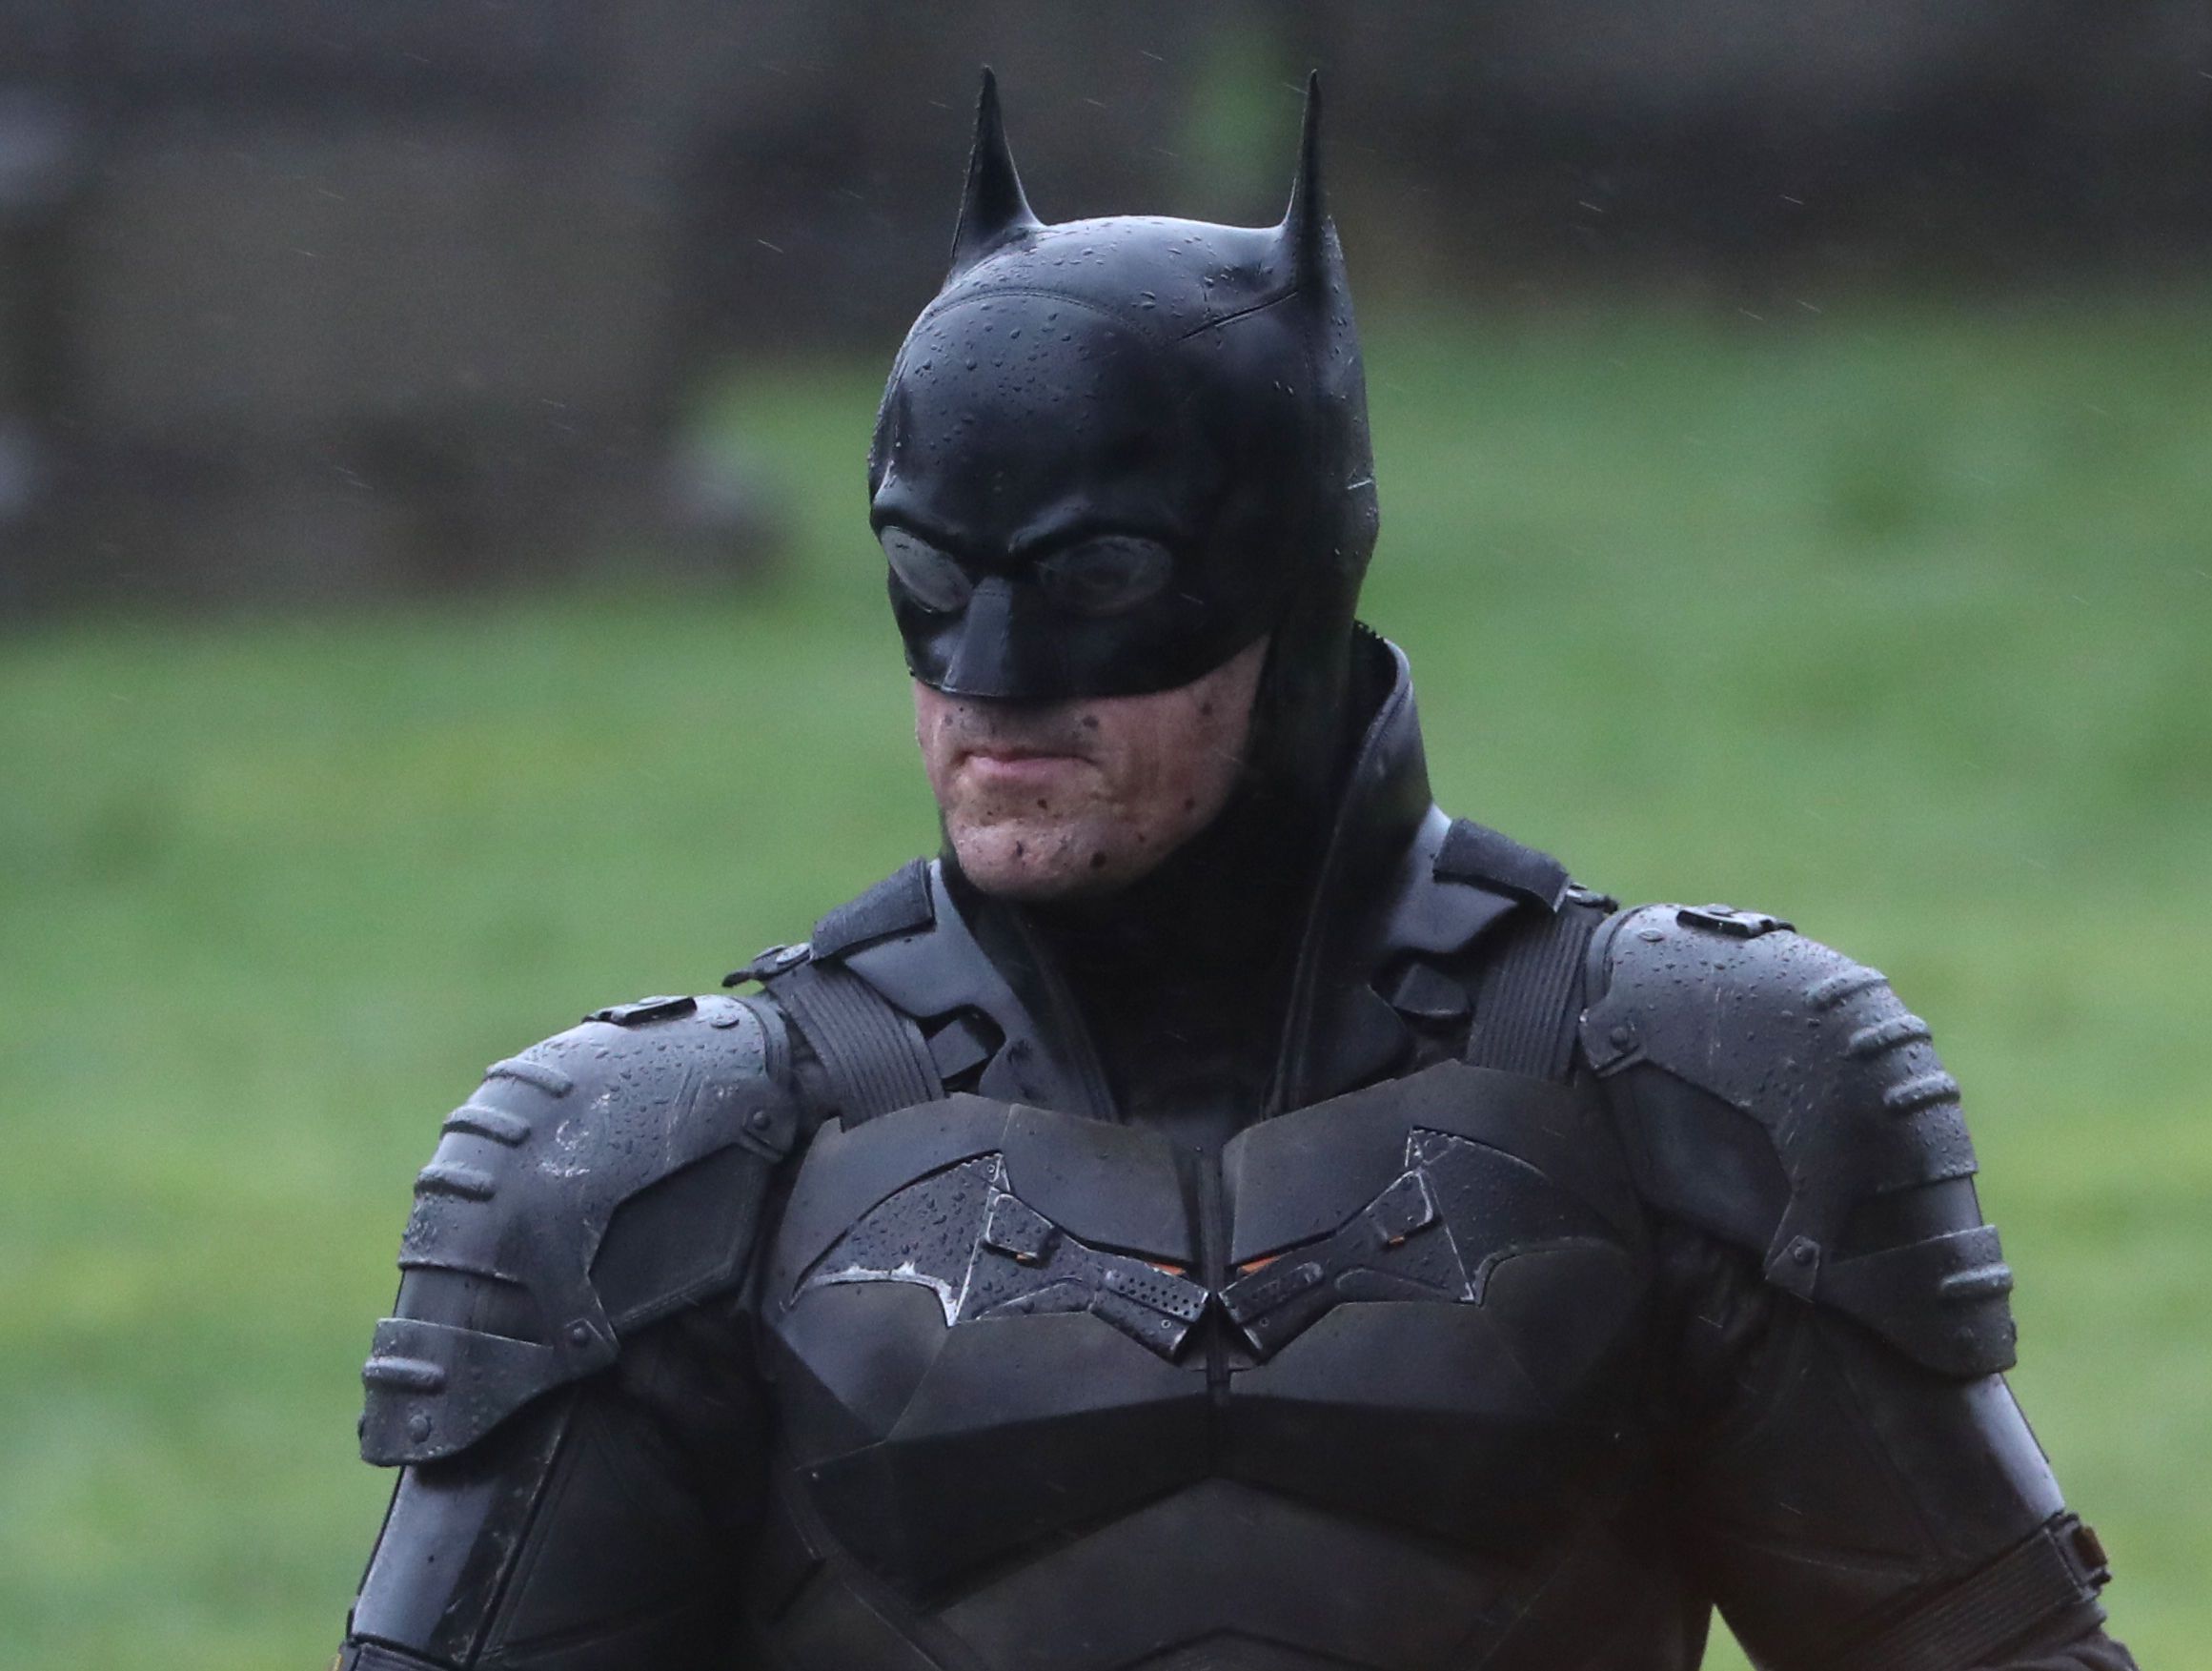 The Batman shows off Batsuit, motorcycle in cemetery production pics